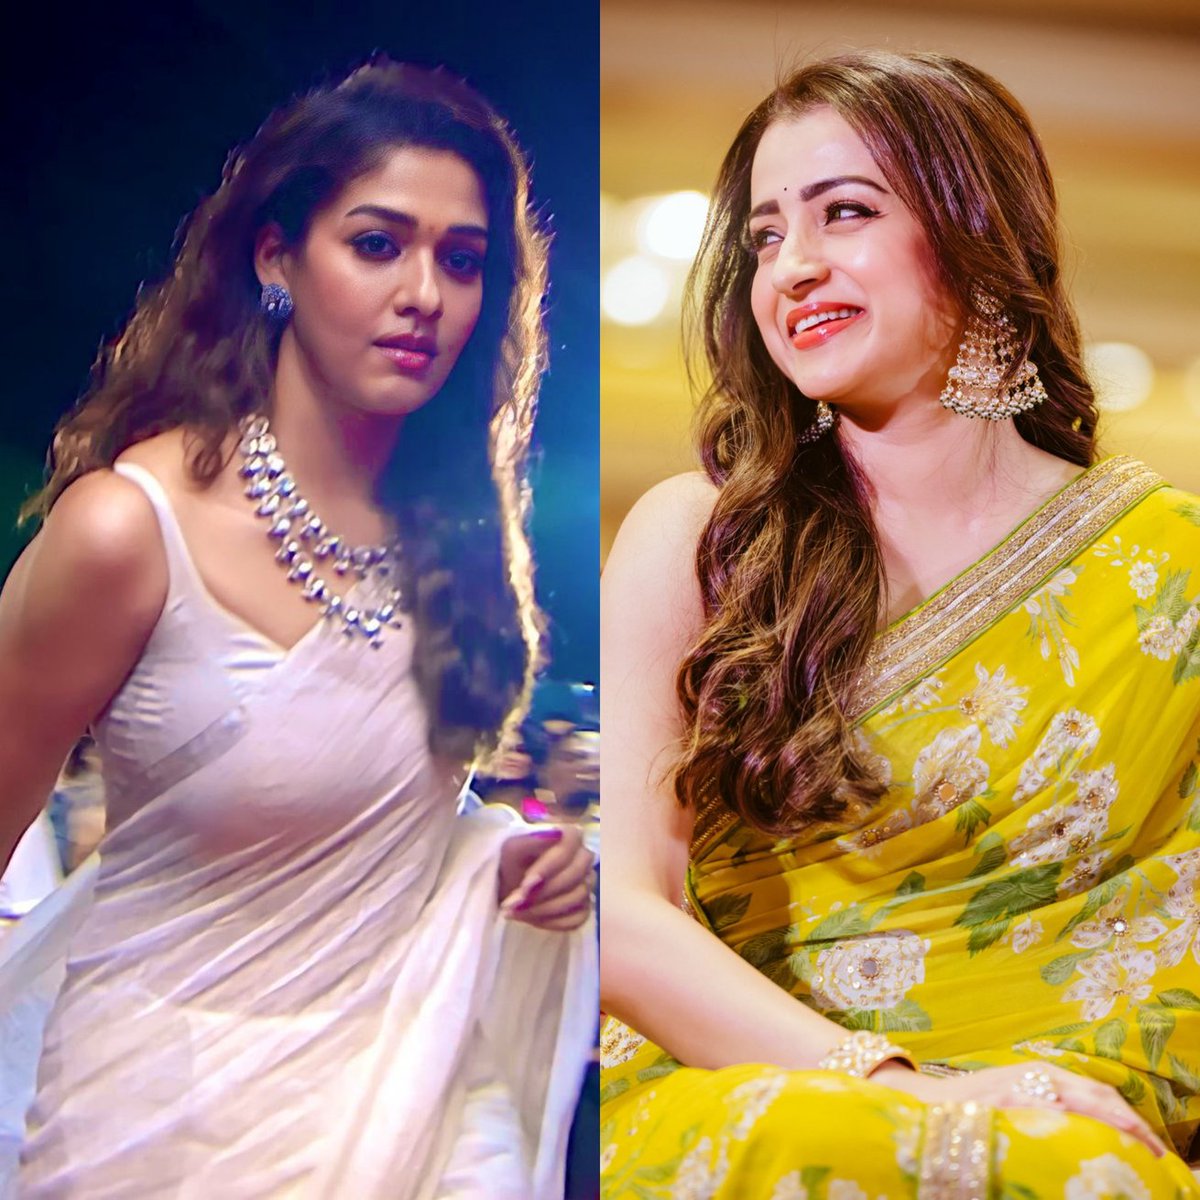 Heated up Rivalries🔥 meet in a poll. Who has the huge fanbase 👑? #Leo 
#TrishaKrishnan vs #Nayan 
#SouthQueenTrisha #ladysuperstarnayanthara
Poll in Comment Section...

RT 🔄 - #Nayanthara LIKE ❤️ - #Trisha